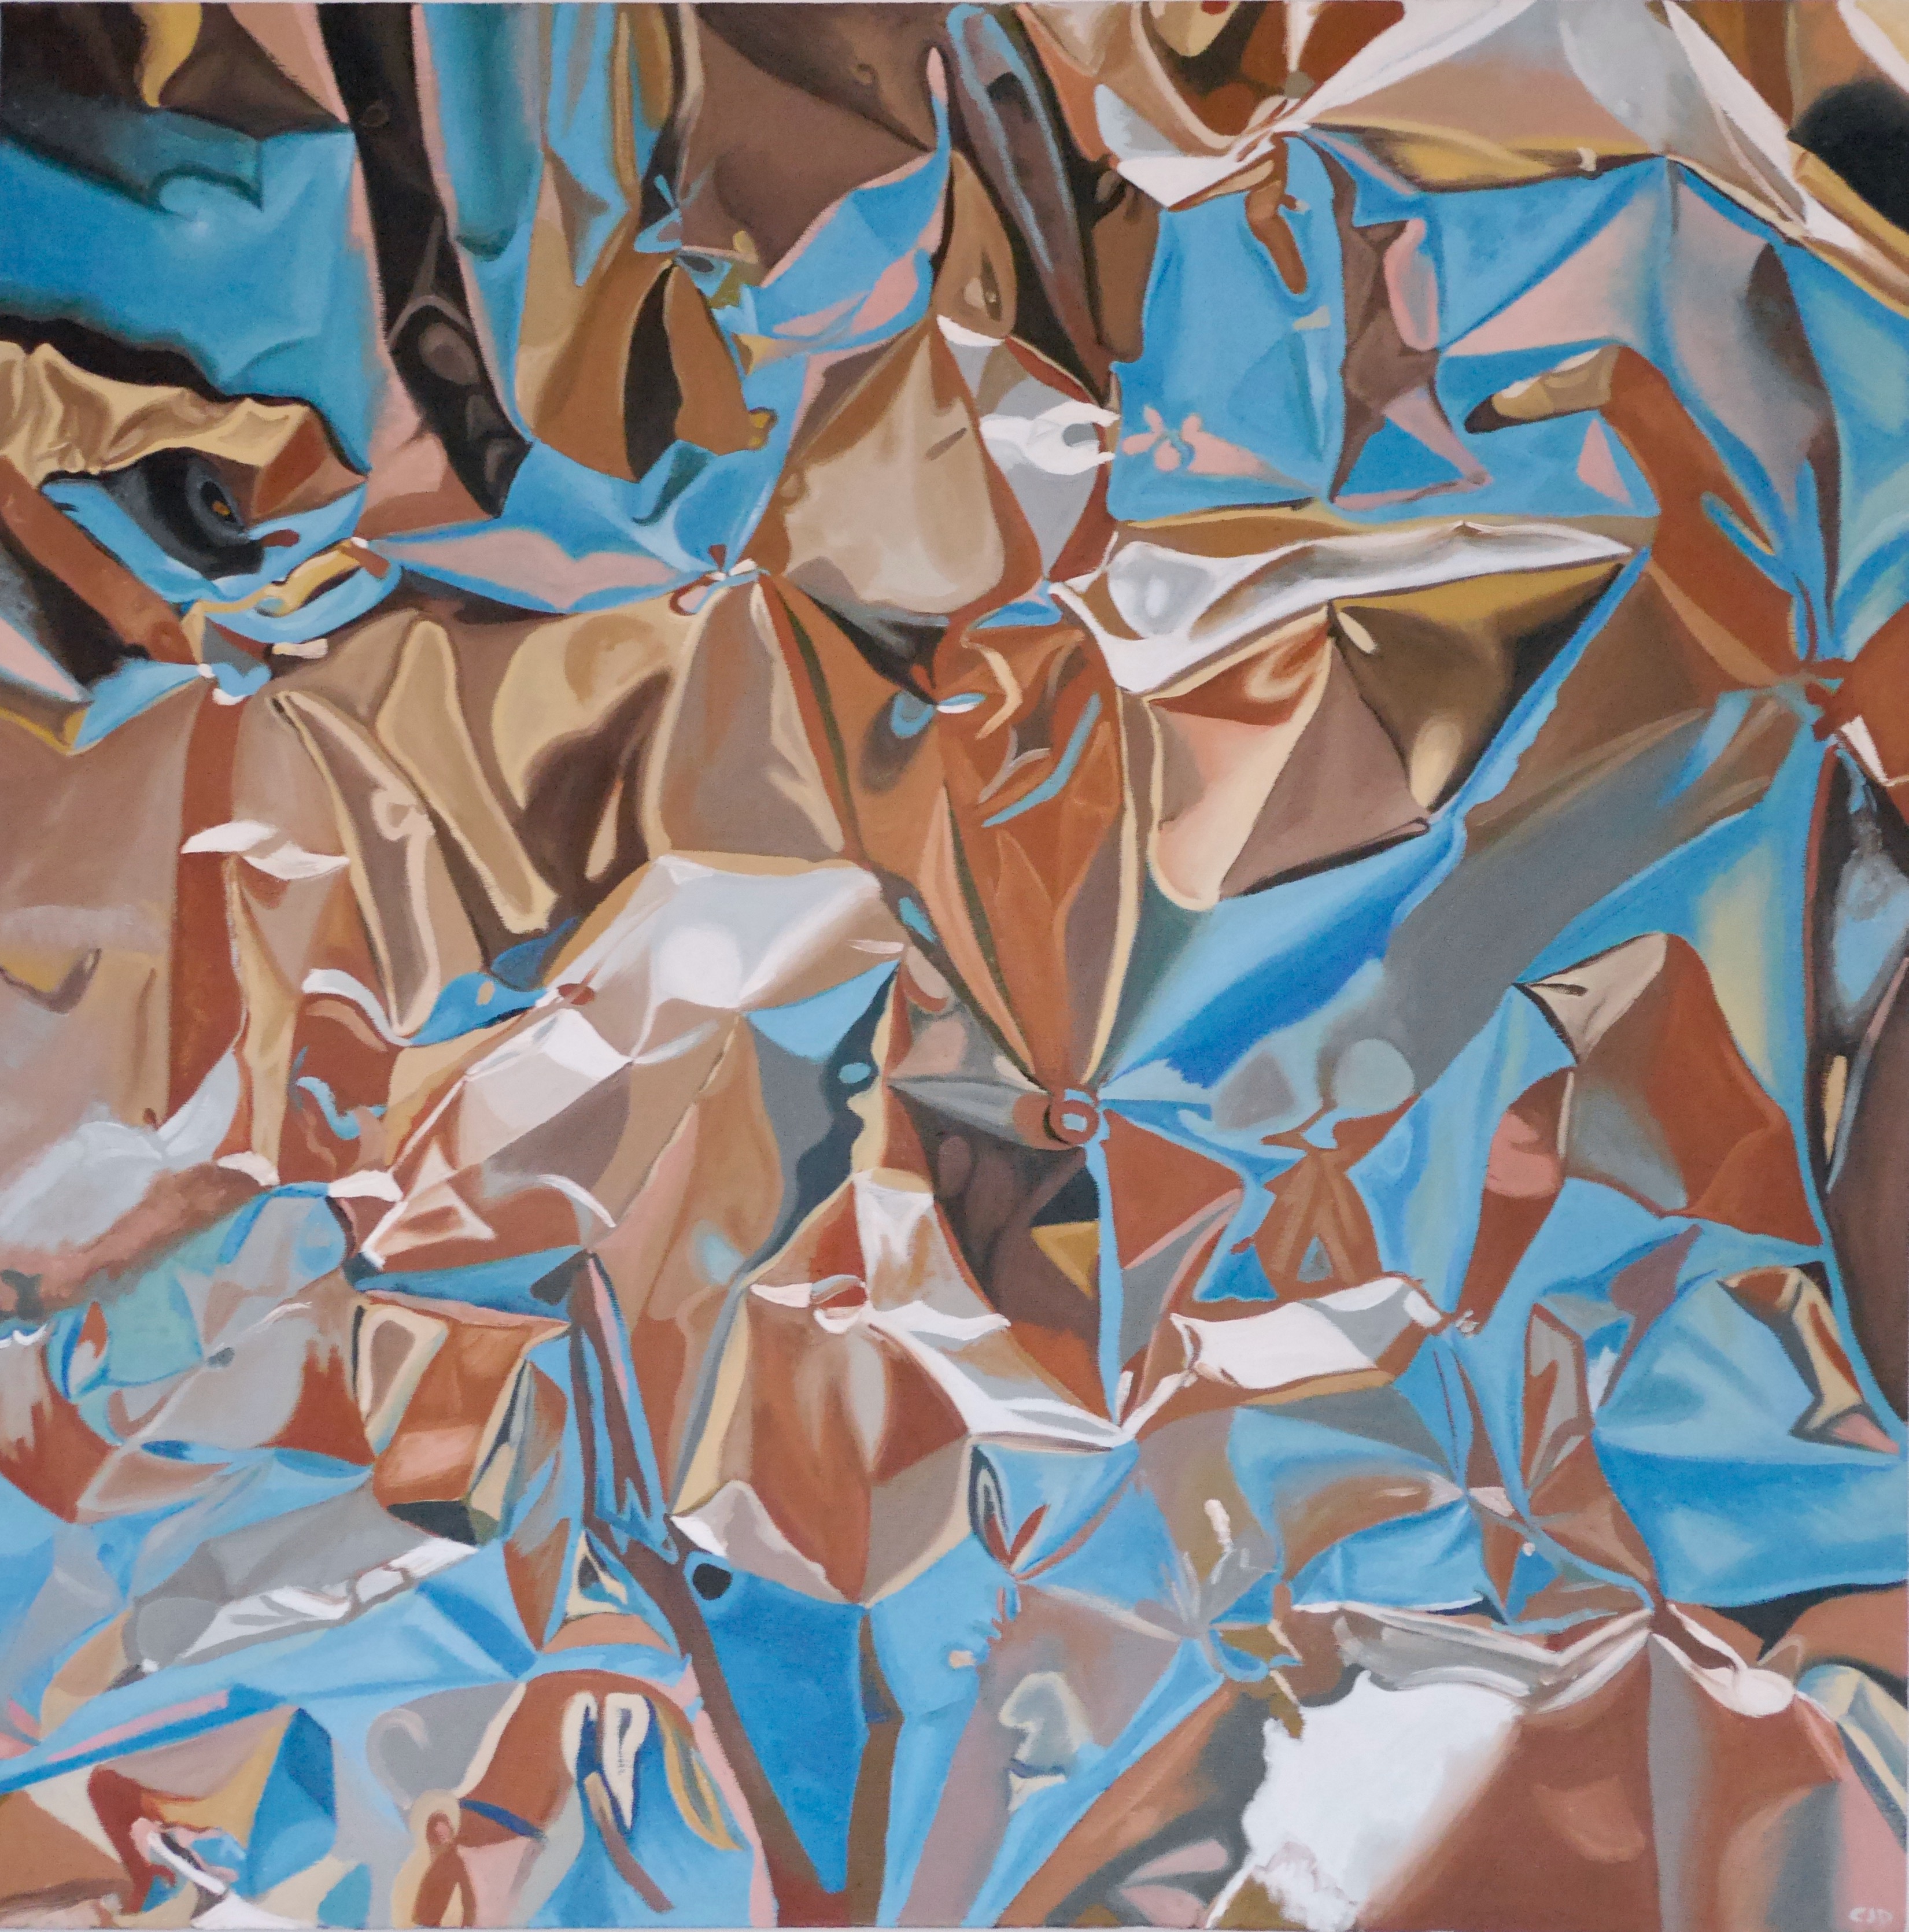 contemporary fine art oil painting of a crumpled reflective silver chrome surface in blue by saatchiart artist Christian Dodd